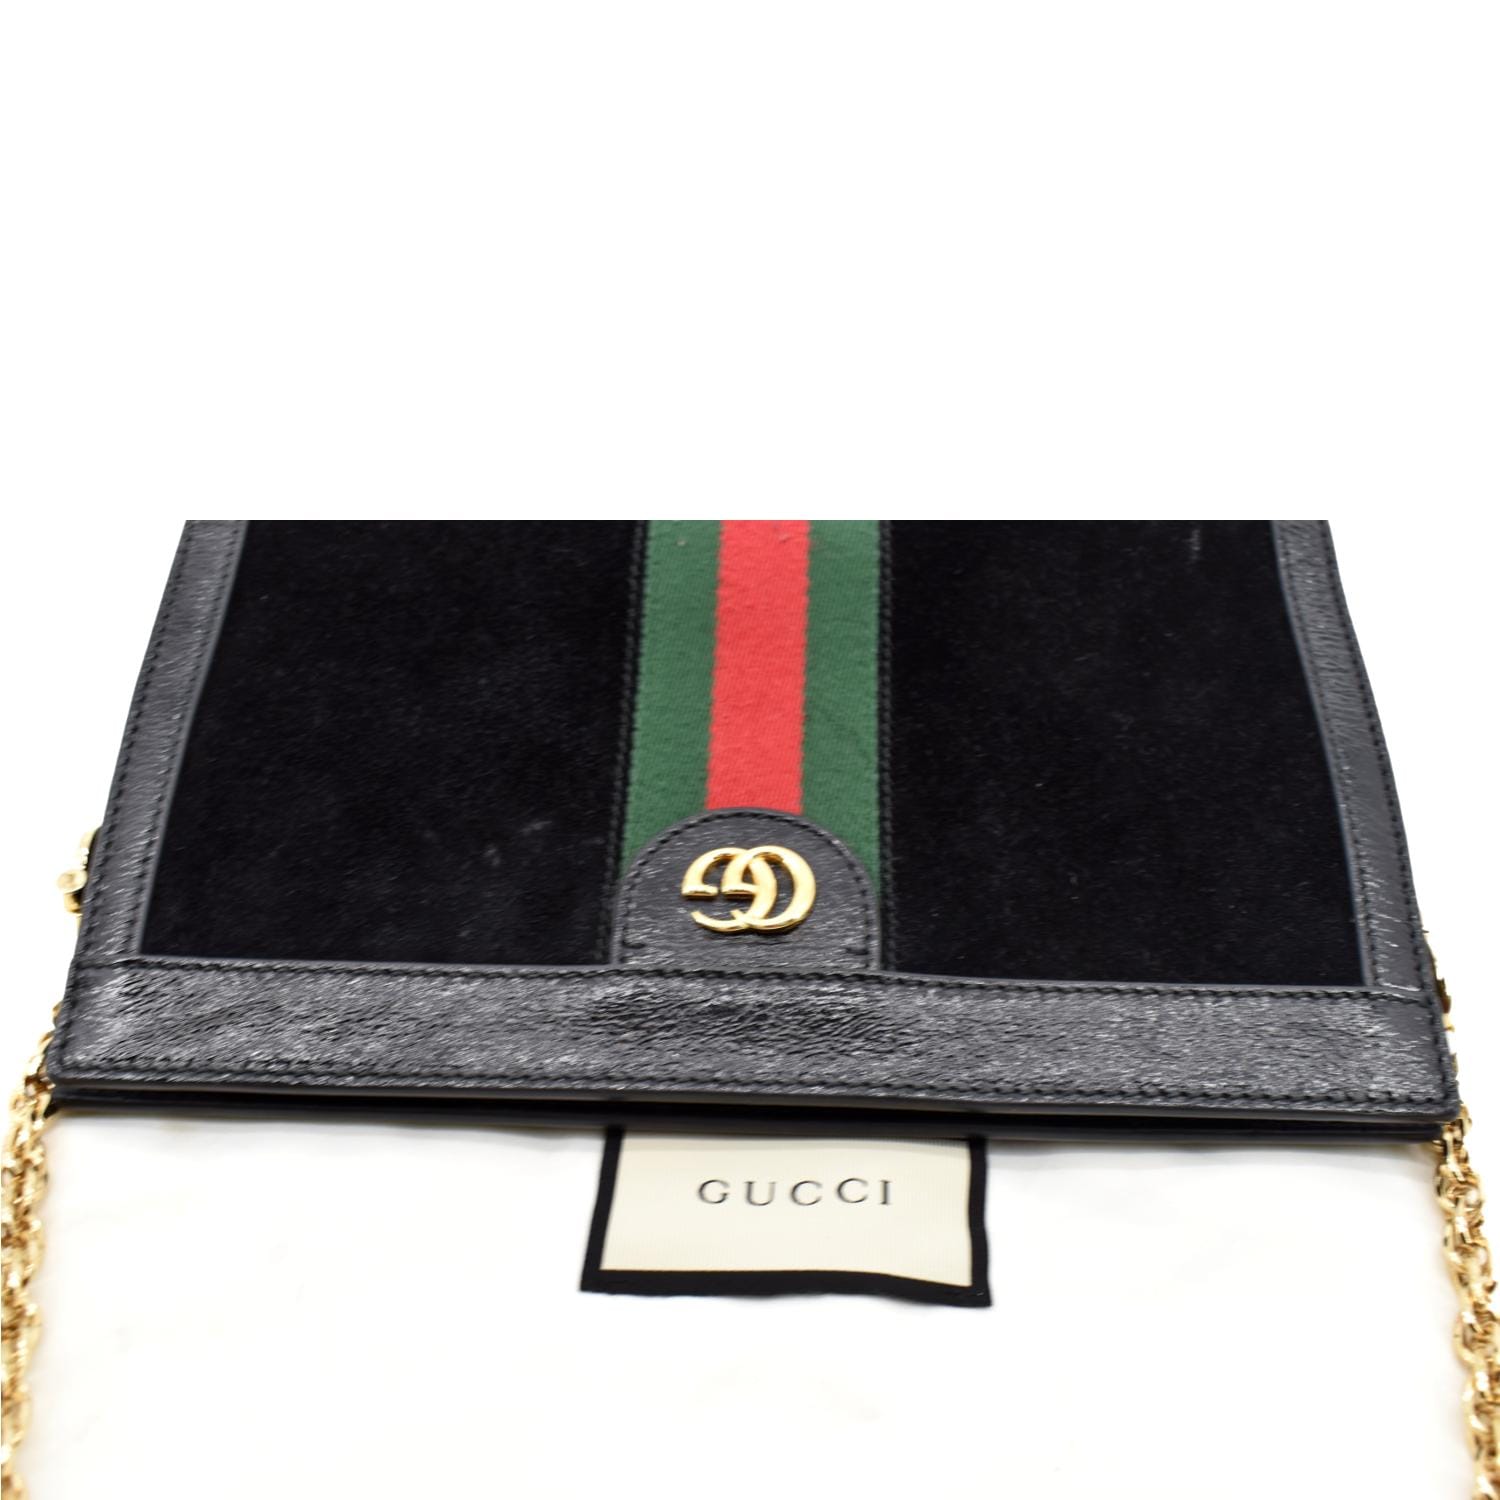 GUCCI Ophidia GG Small Web Suede Leather Shoulder Bag Black 503877